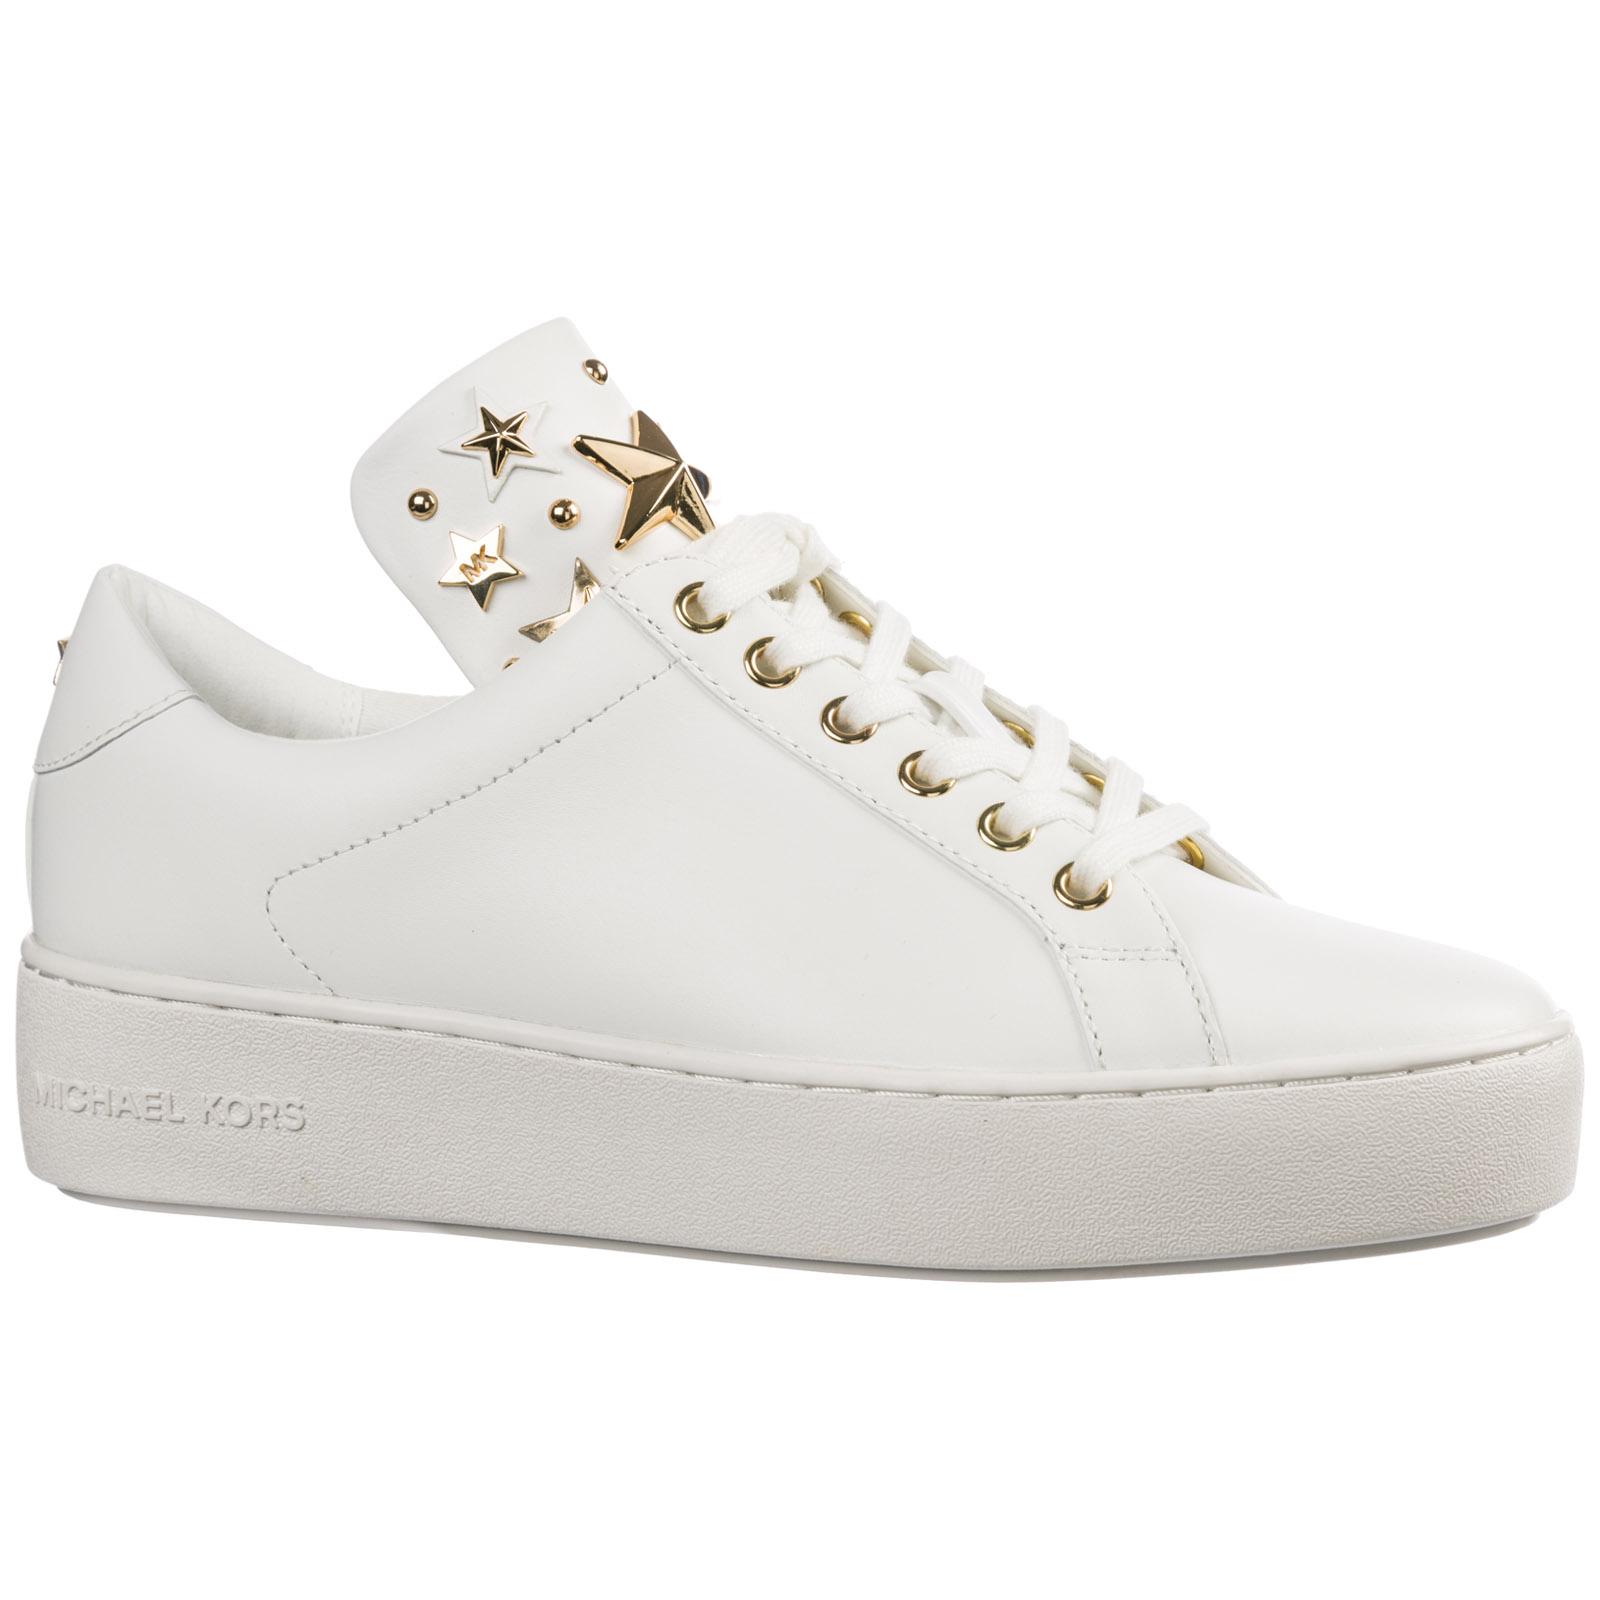 Lyst - Michael Kors Shoes Leather Trainers Sneakers in White